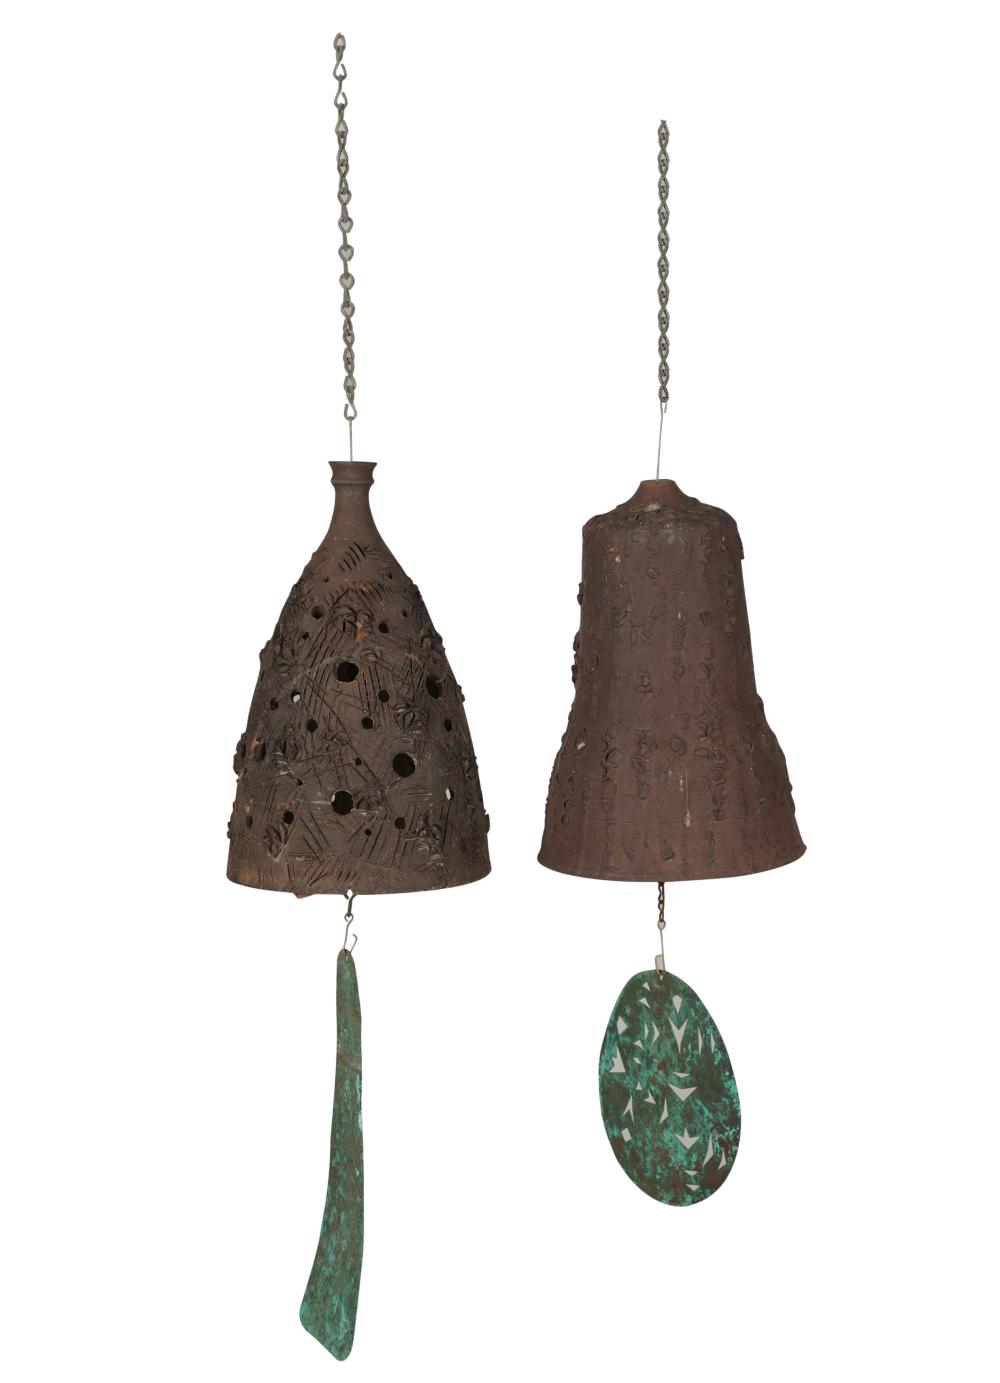 TWO CERAMIC AND METAL WIND CHIMESTwo